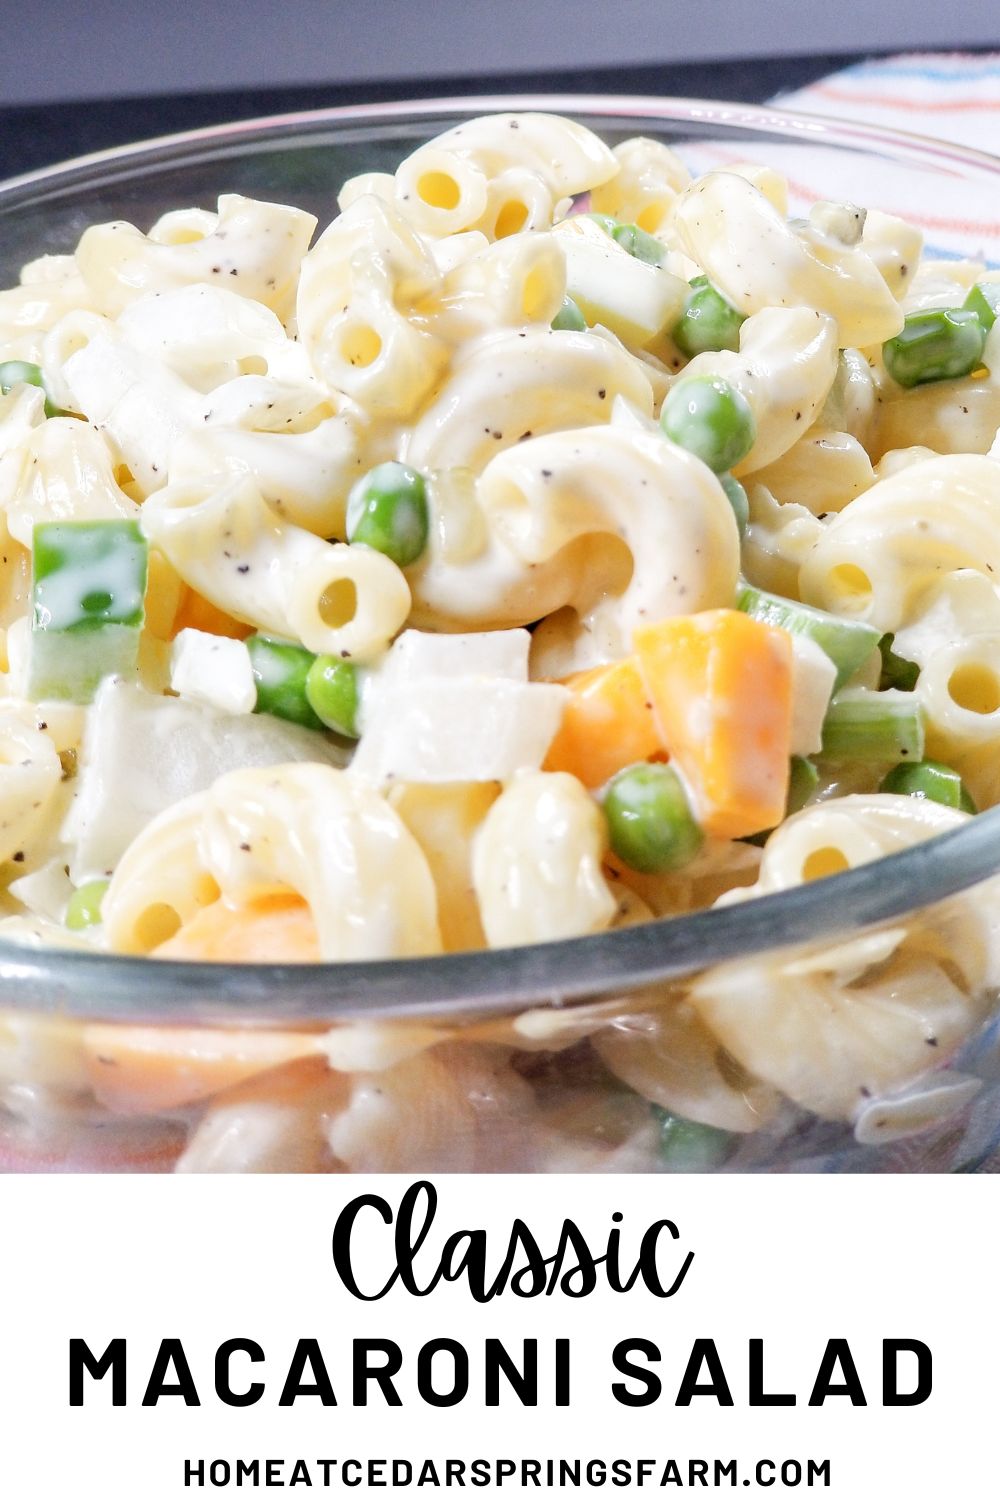 picture of macaroni salad with text overlay